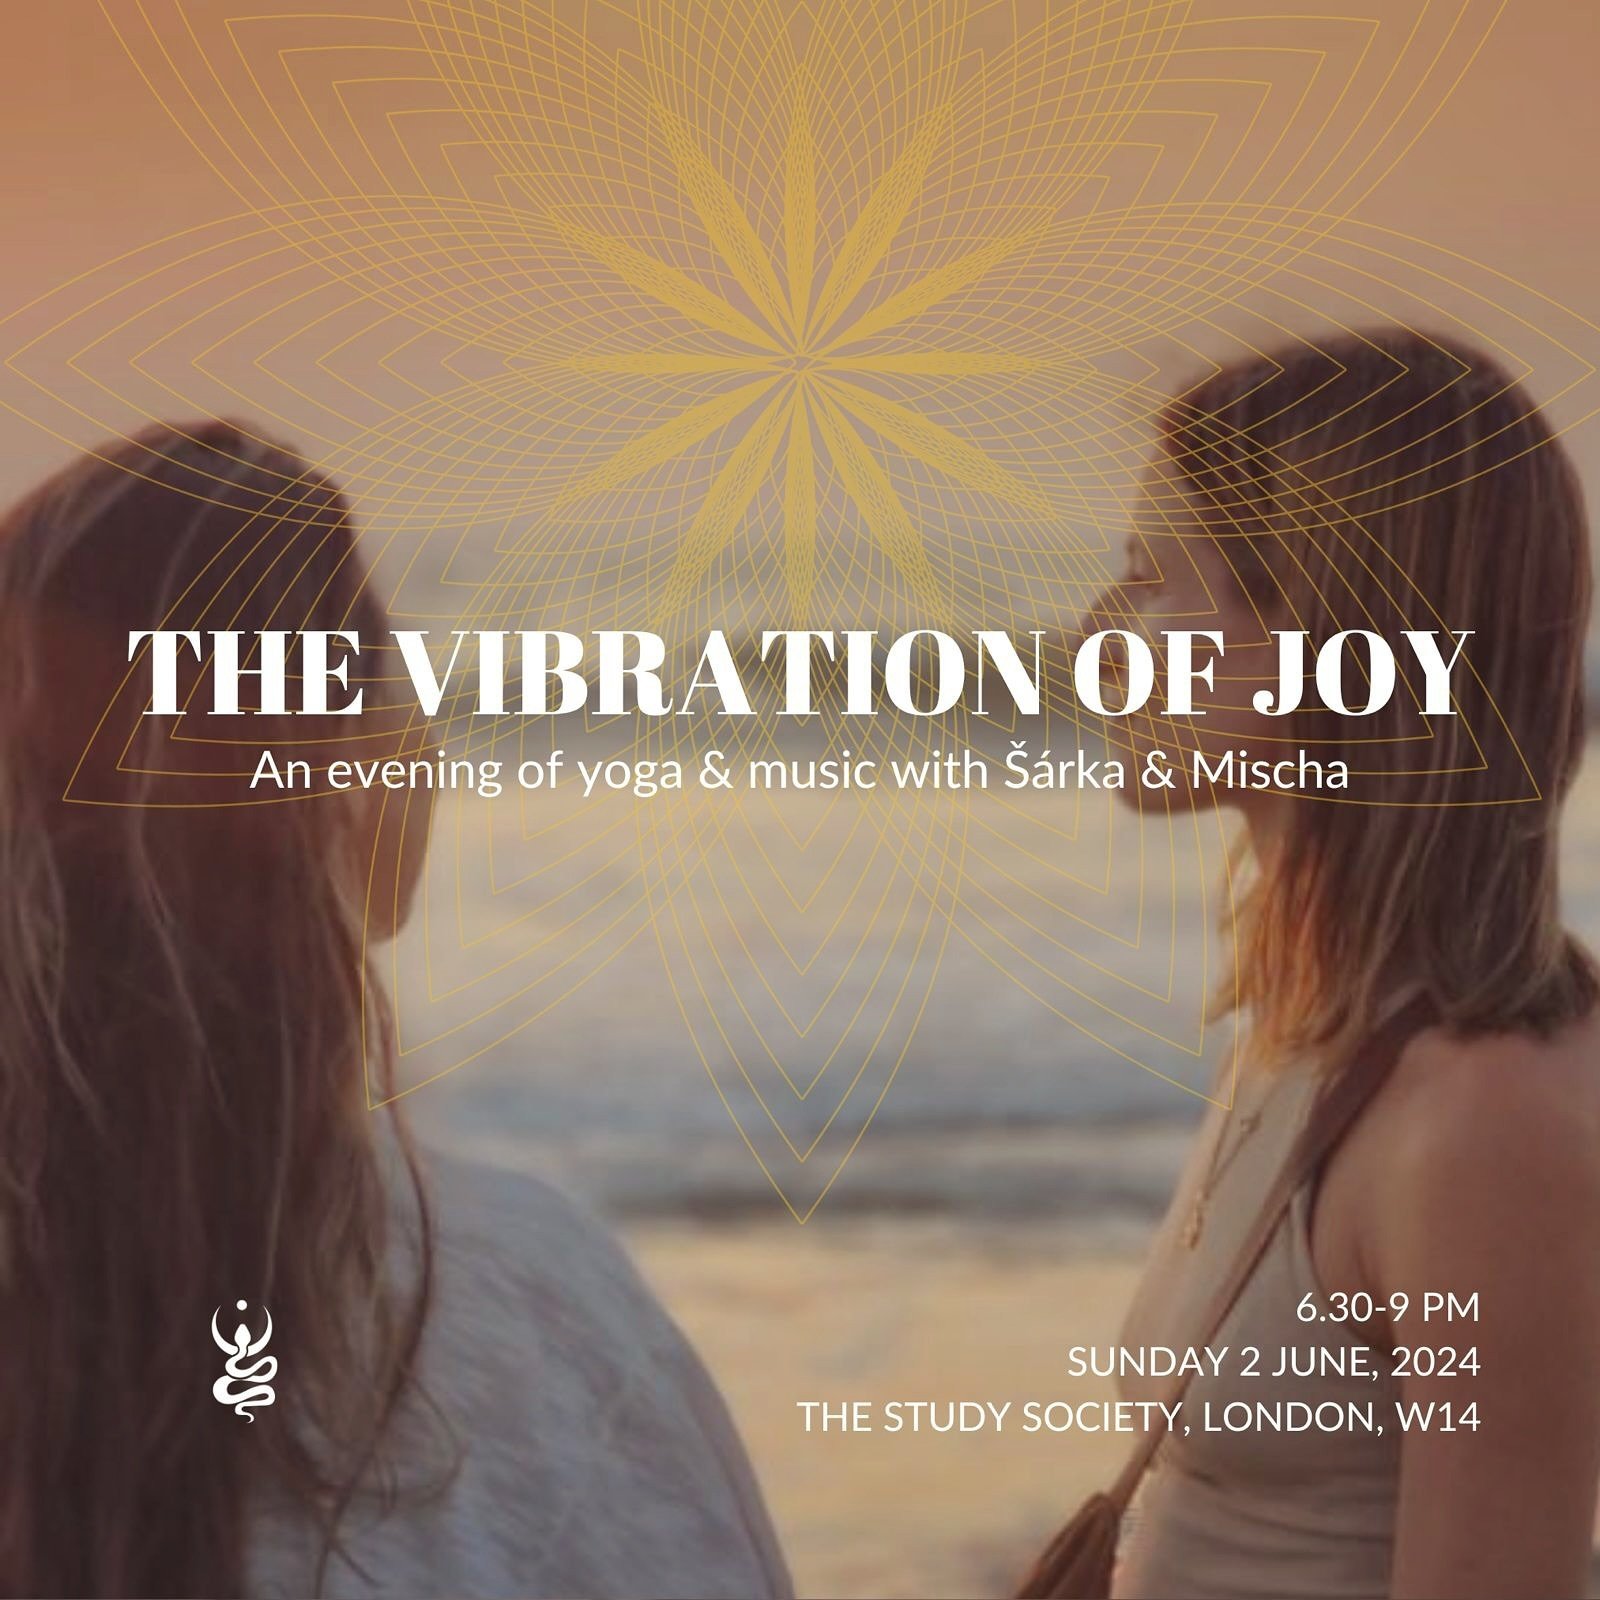 Ｔｈｅ Ｖｉｂｒａｔｉｏｎ ｏｆ Ｊｏｙ💓

The spiritual traditions understand Human Consciousness as existing in an intricate collection of states of consciousness, that every organ, each part of our body, physical and subtle has its own state of consciousness. Vibrat